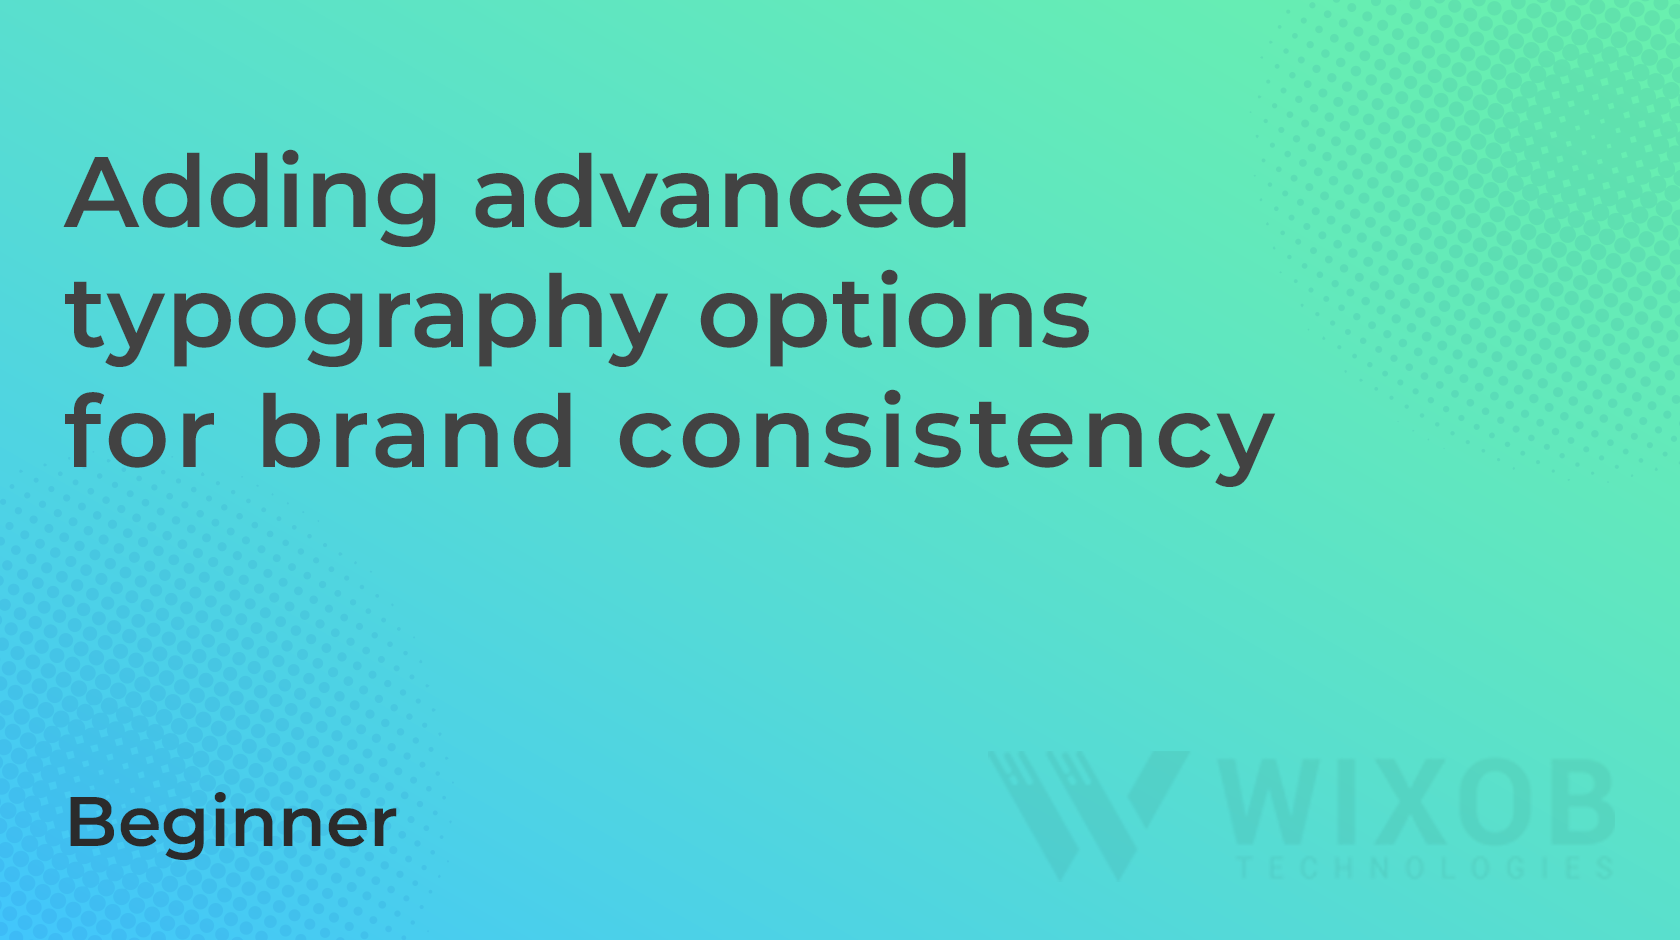 Adding advanced typography options for brand consistency